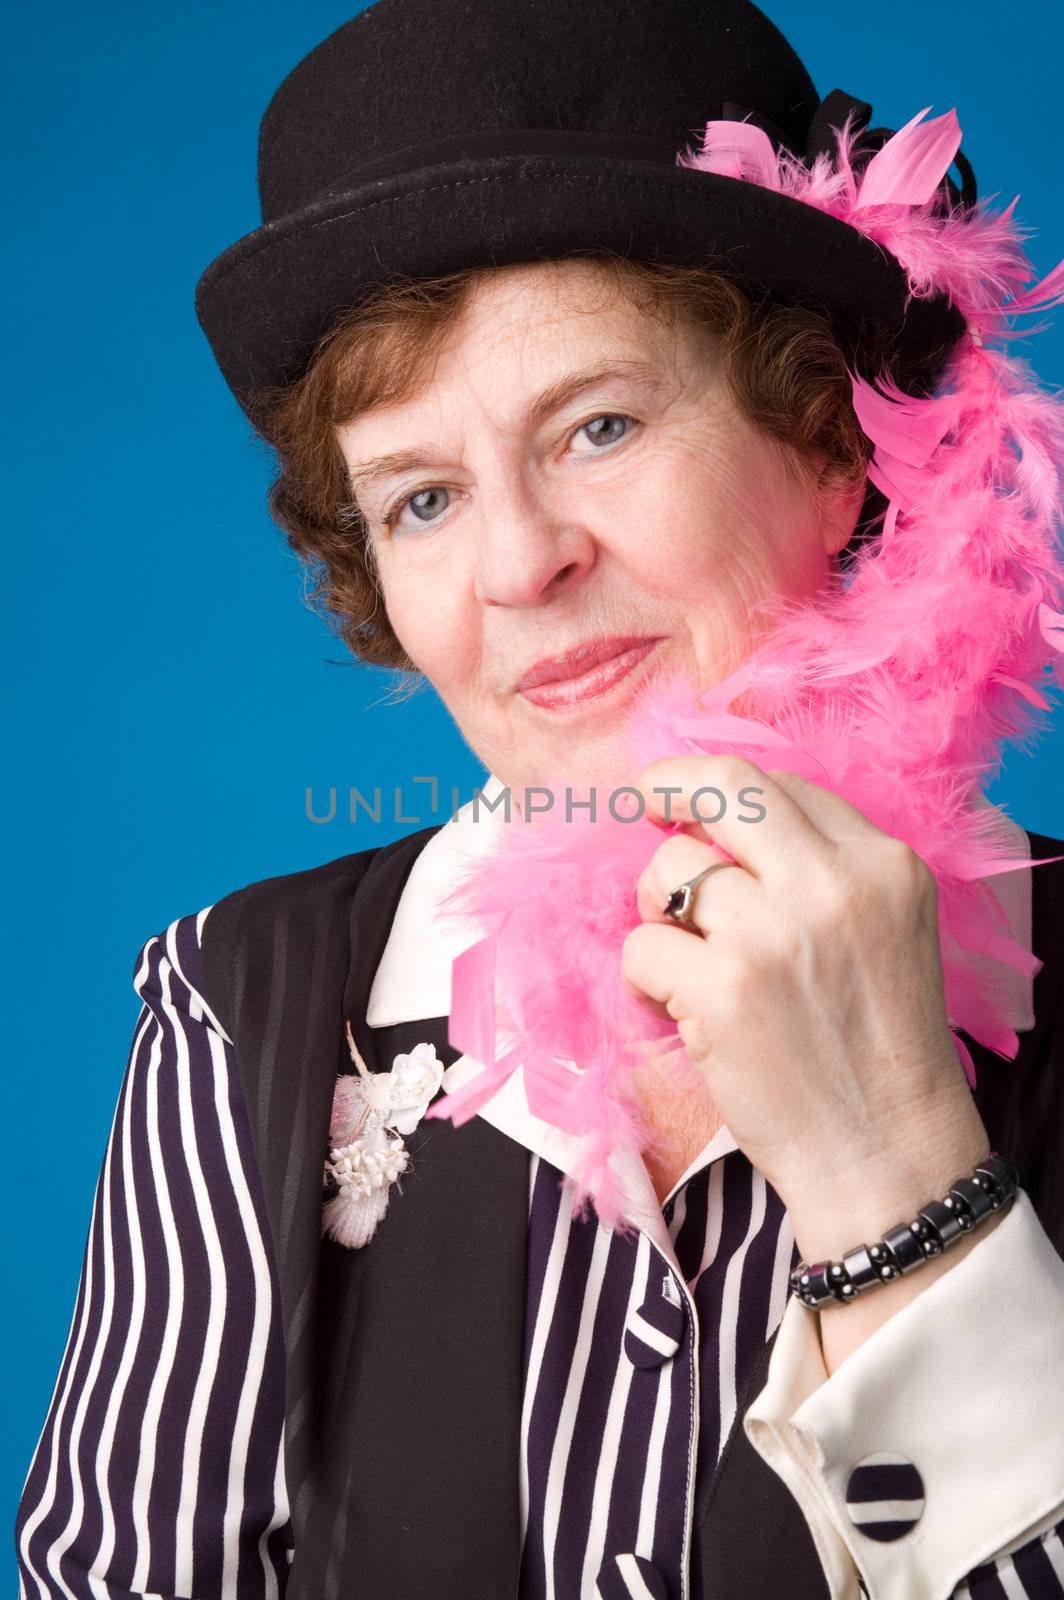 The cheerful elderly woman in black hat on a blue background.